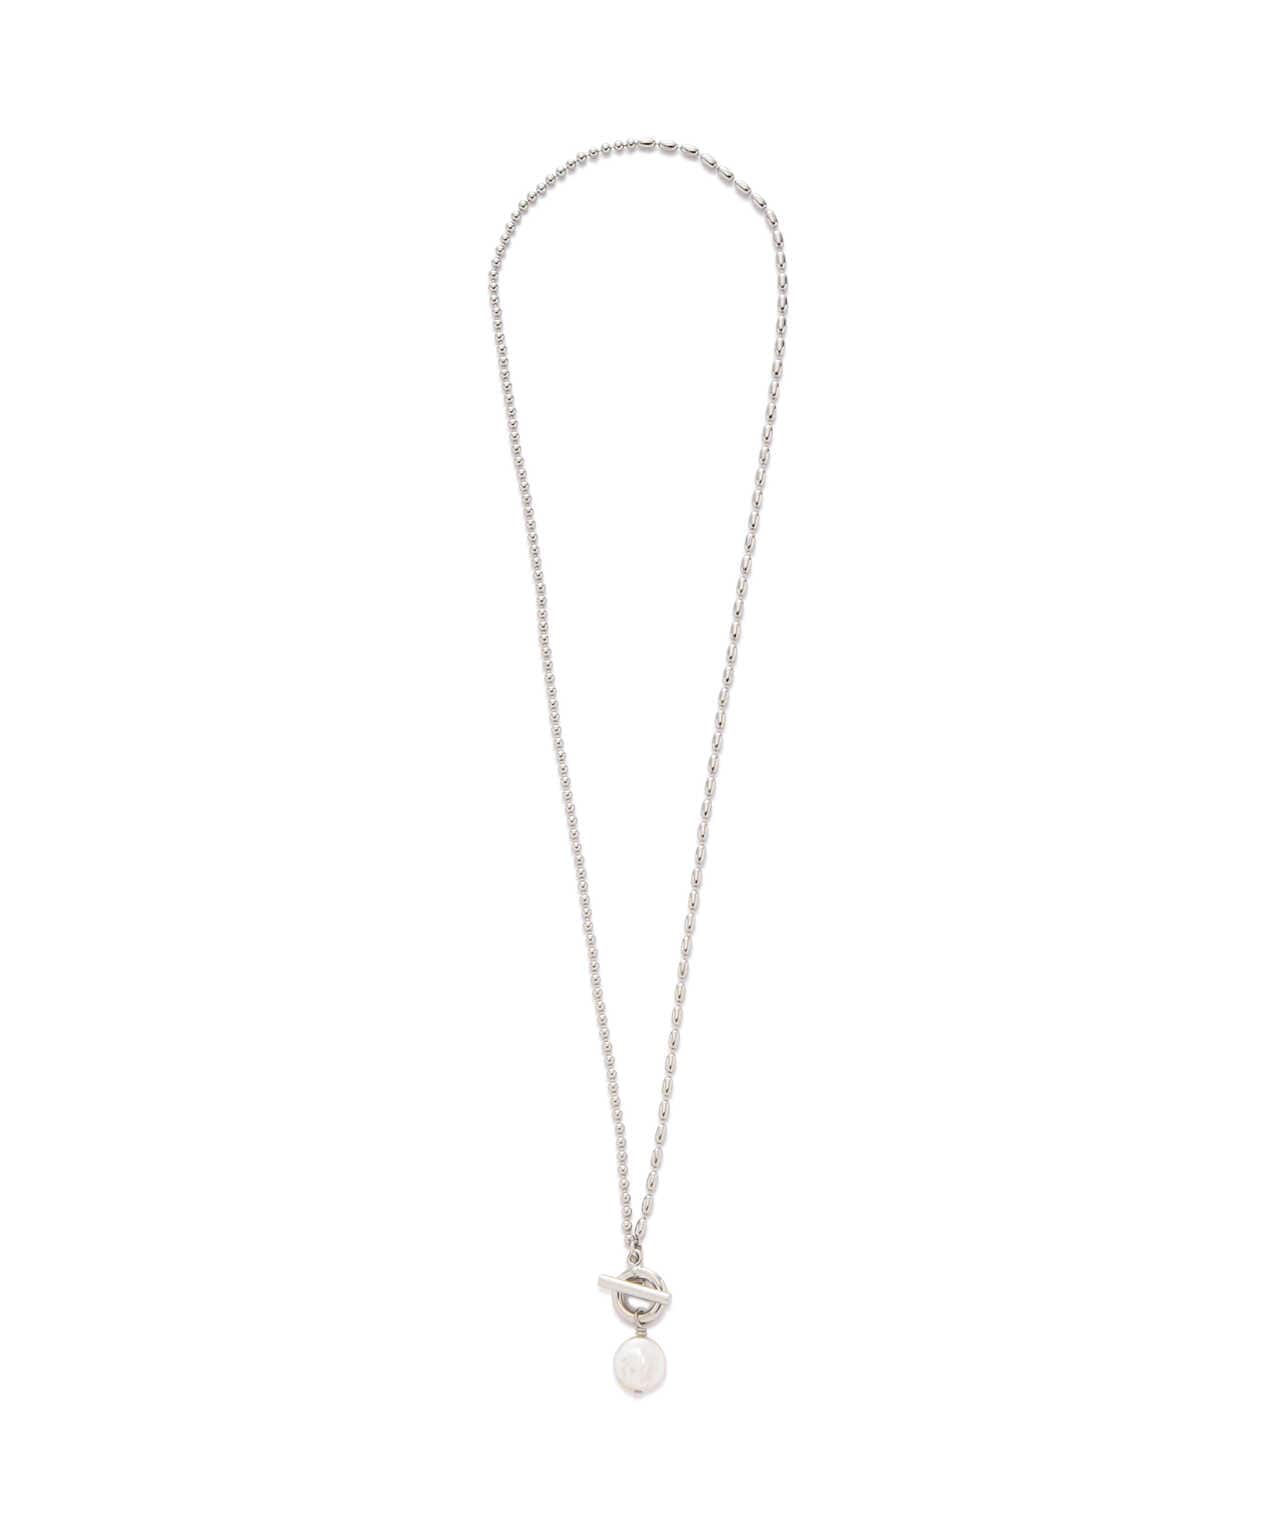 DROIT BELLO(ドロイトベロ) PEARL CHAIN NECKLACE/パールチェーンネックレス